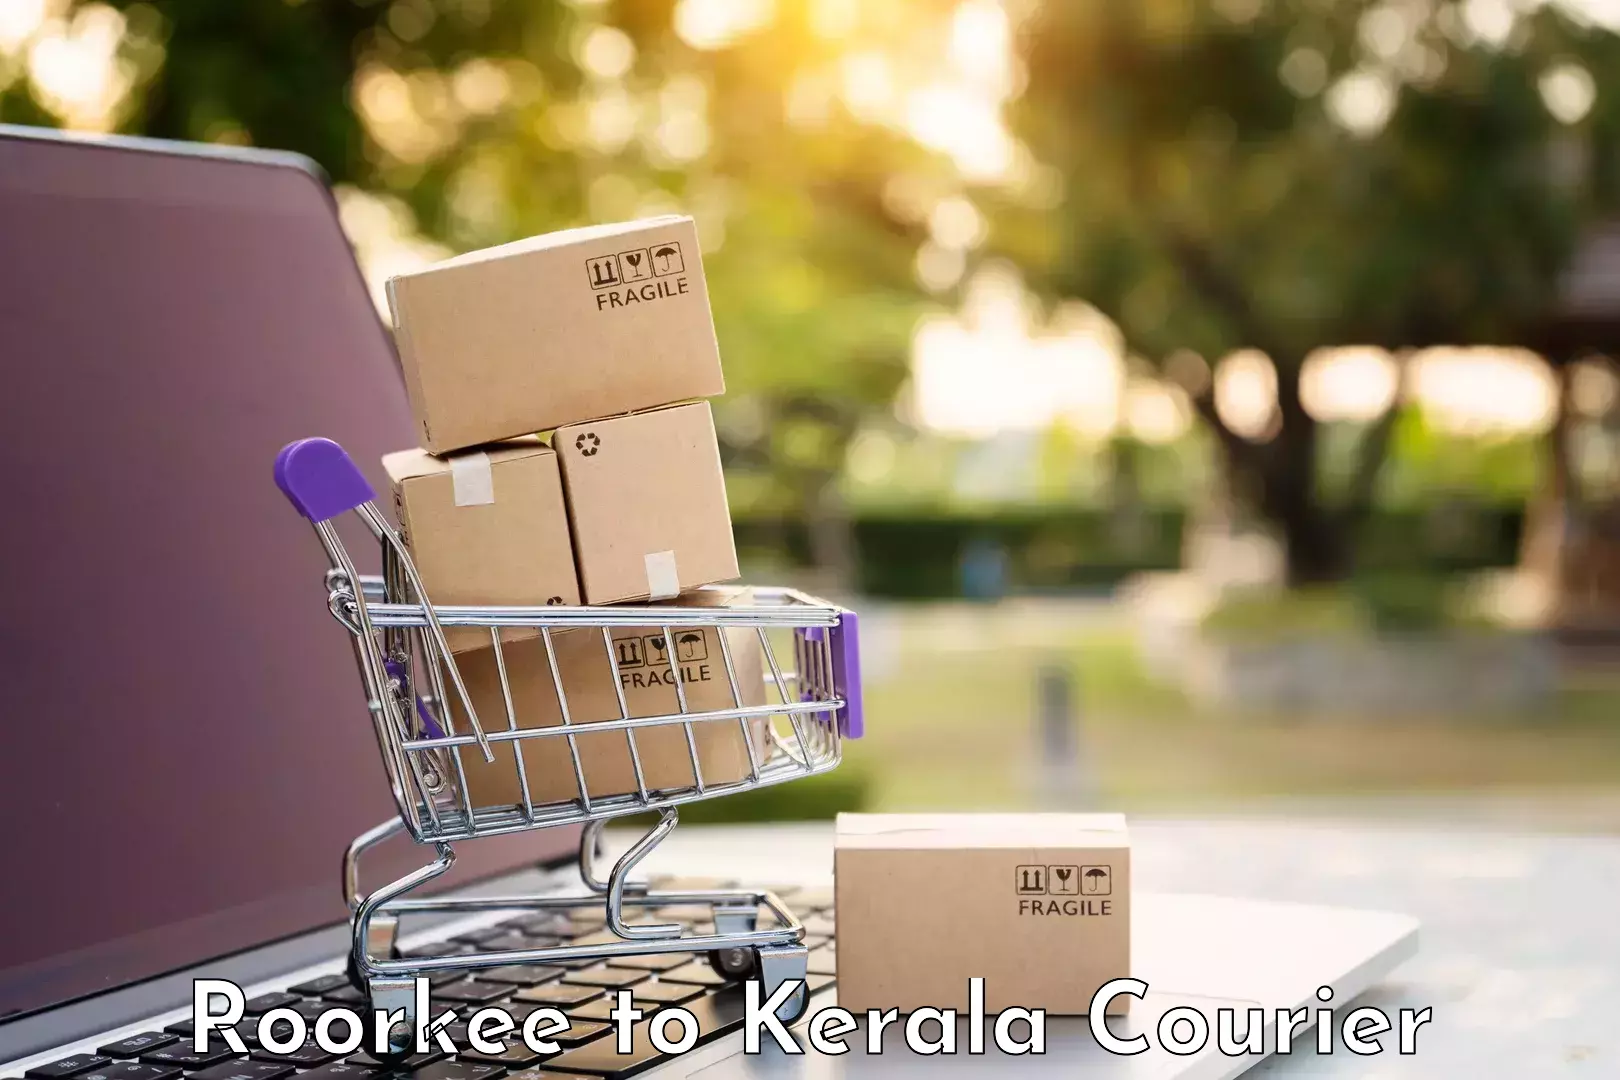 Baggage transport professionals Roorkee to Kerala